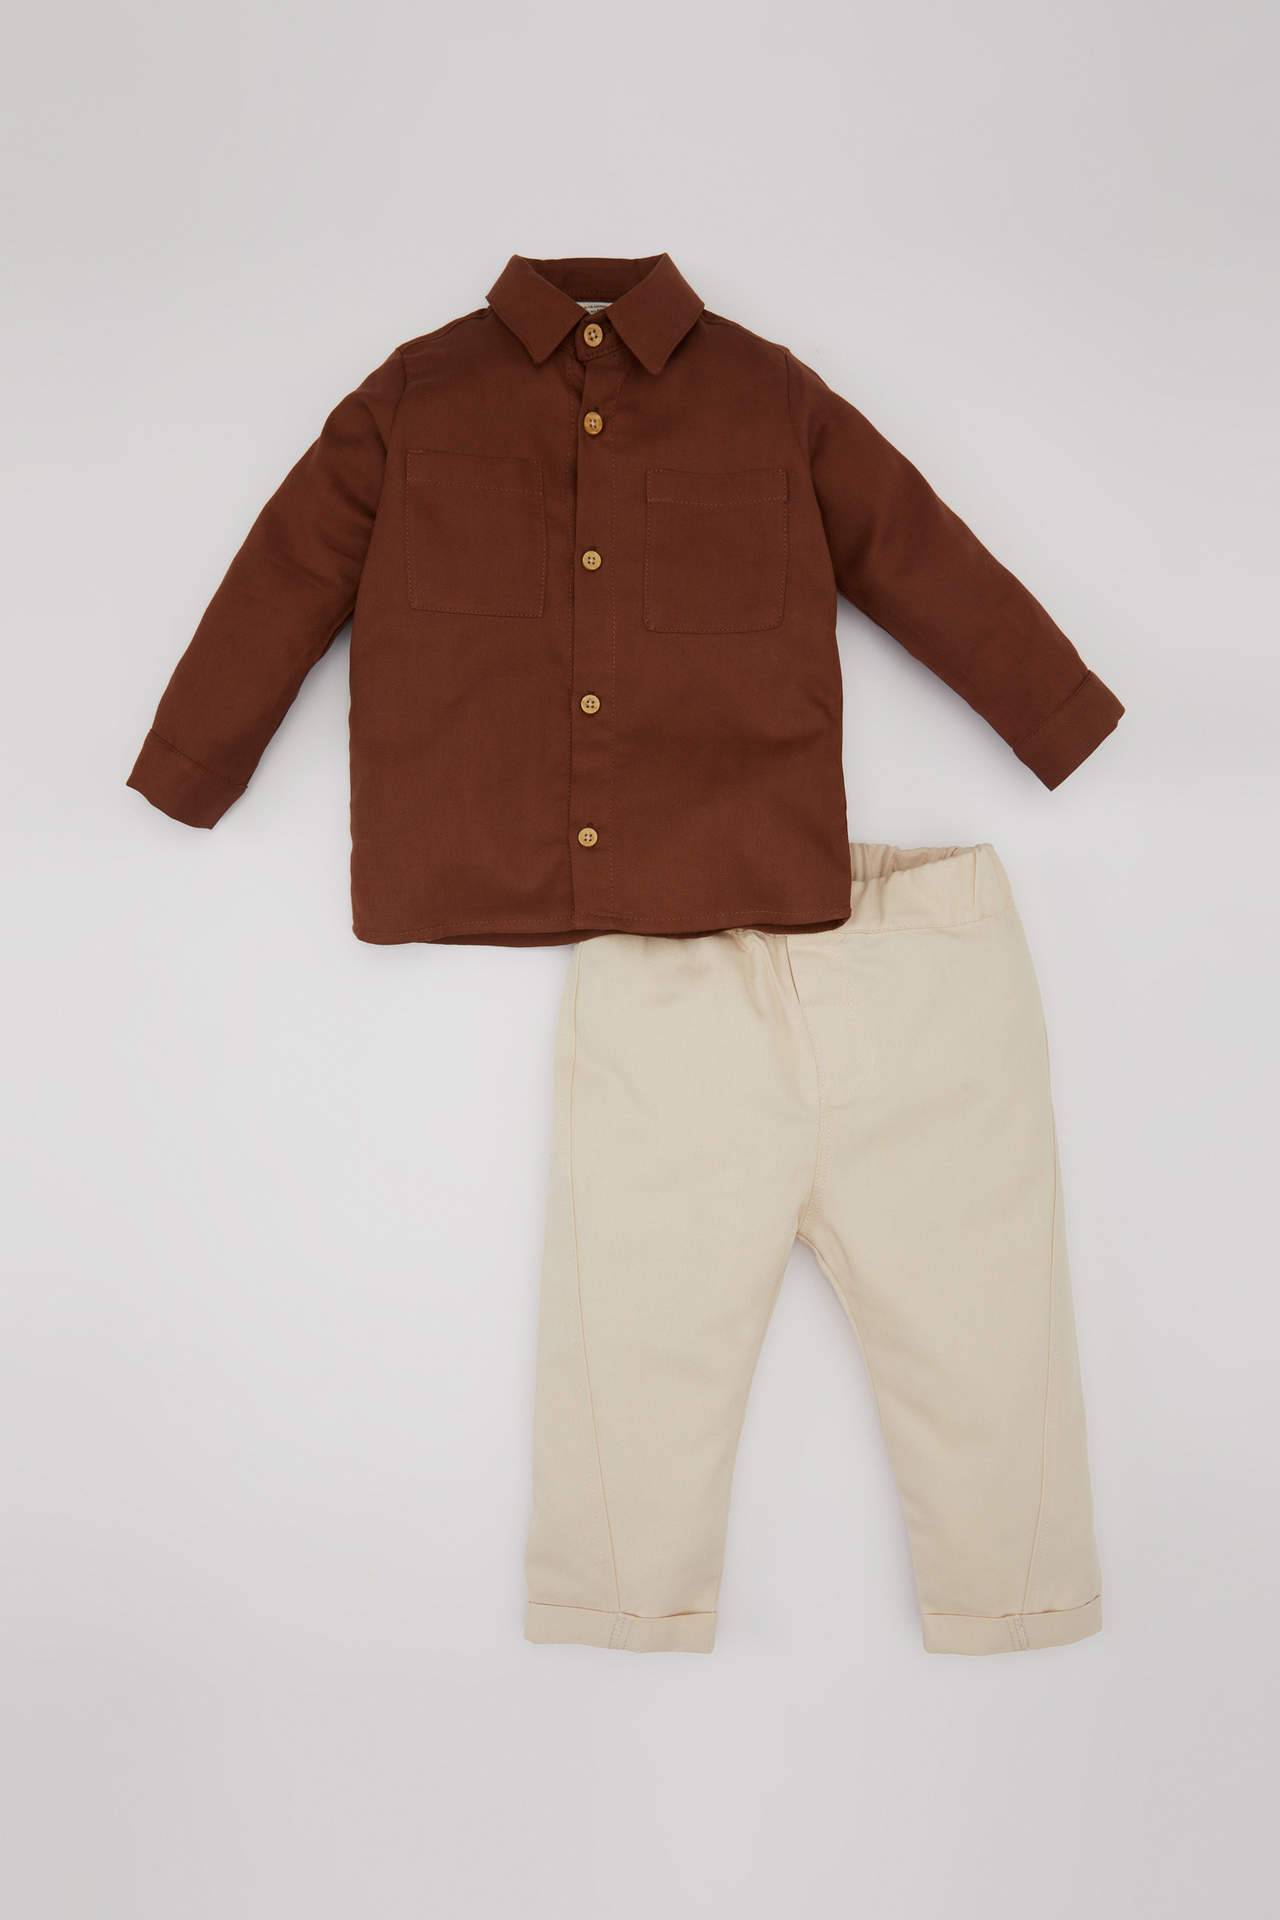 DEFACTO Baby Boy Shirt Twill Trousers 2 Piece Set